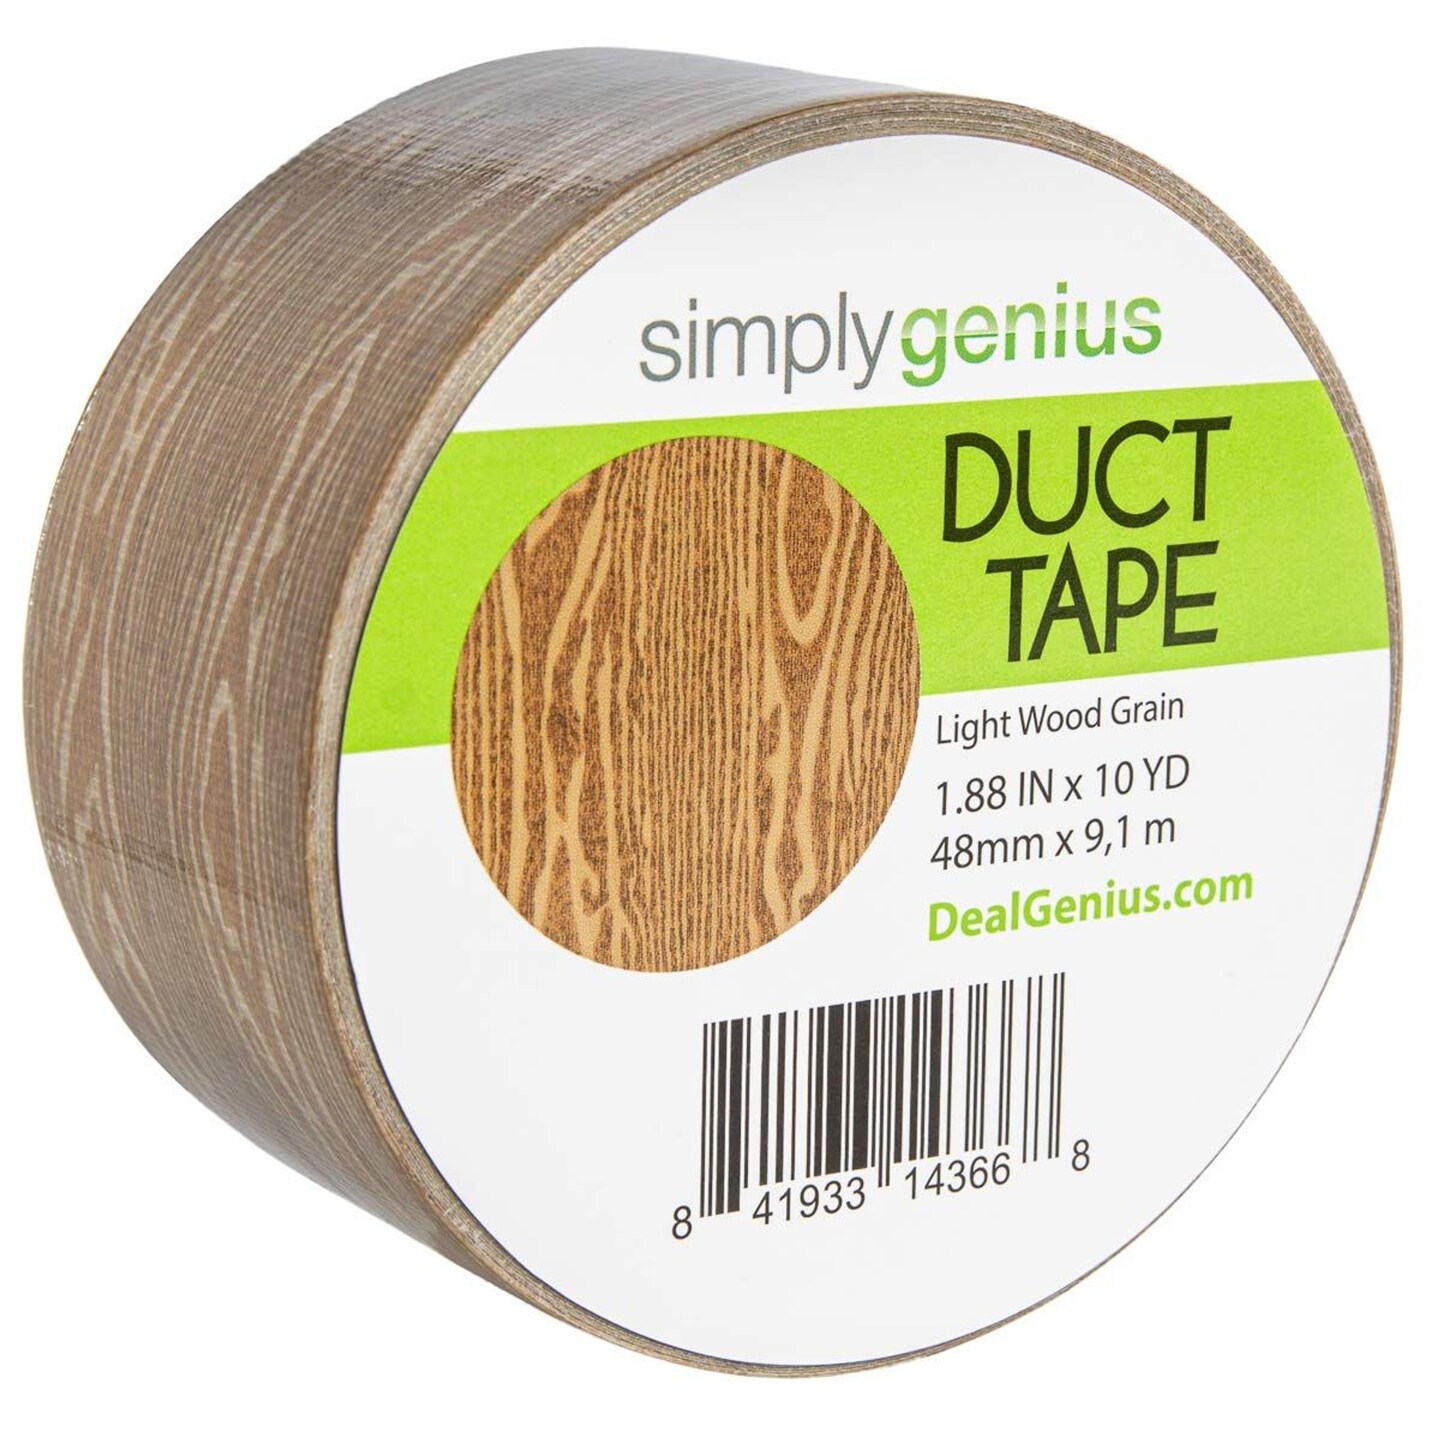 Simply Genius Pattern Duct Tape Heavy Duty - Craft Supplies for Kids &#x26; Adults - Colored Duct Tape - Single Roll 1.8 in x 10 yards - Colorful Tape for DIY, Craft &#x26; Home Improvement (Light Wood Grain)